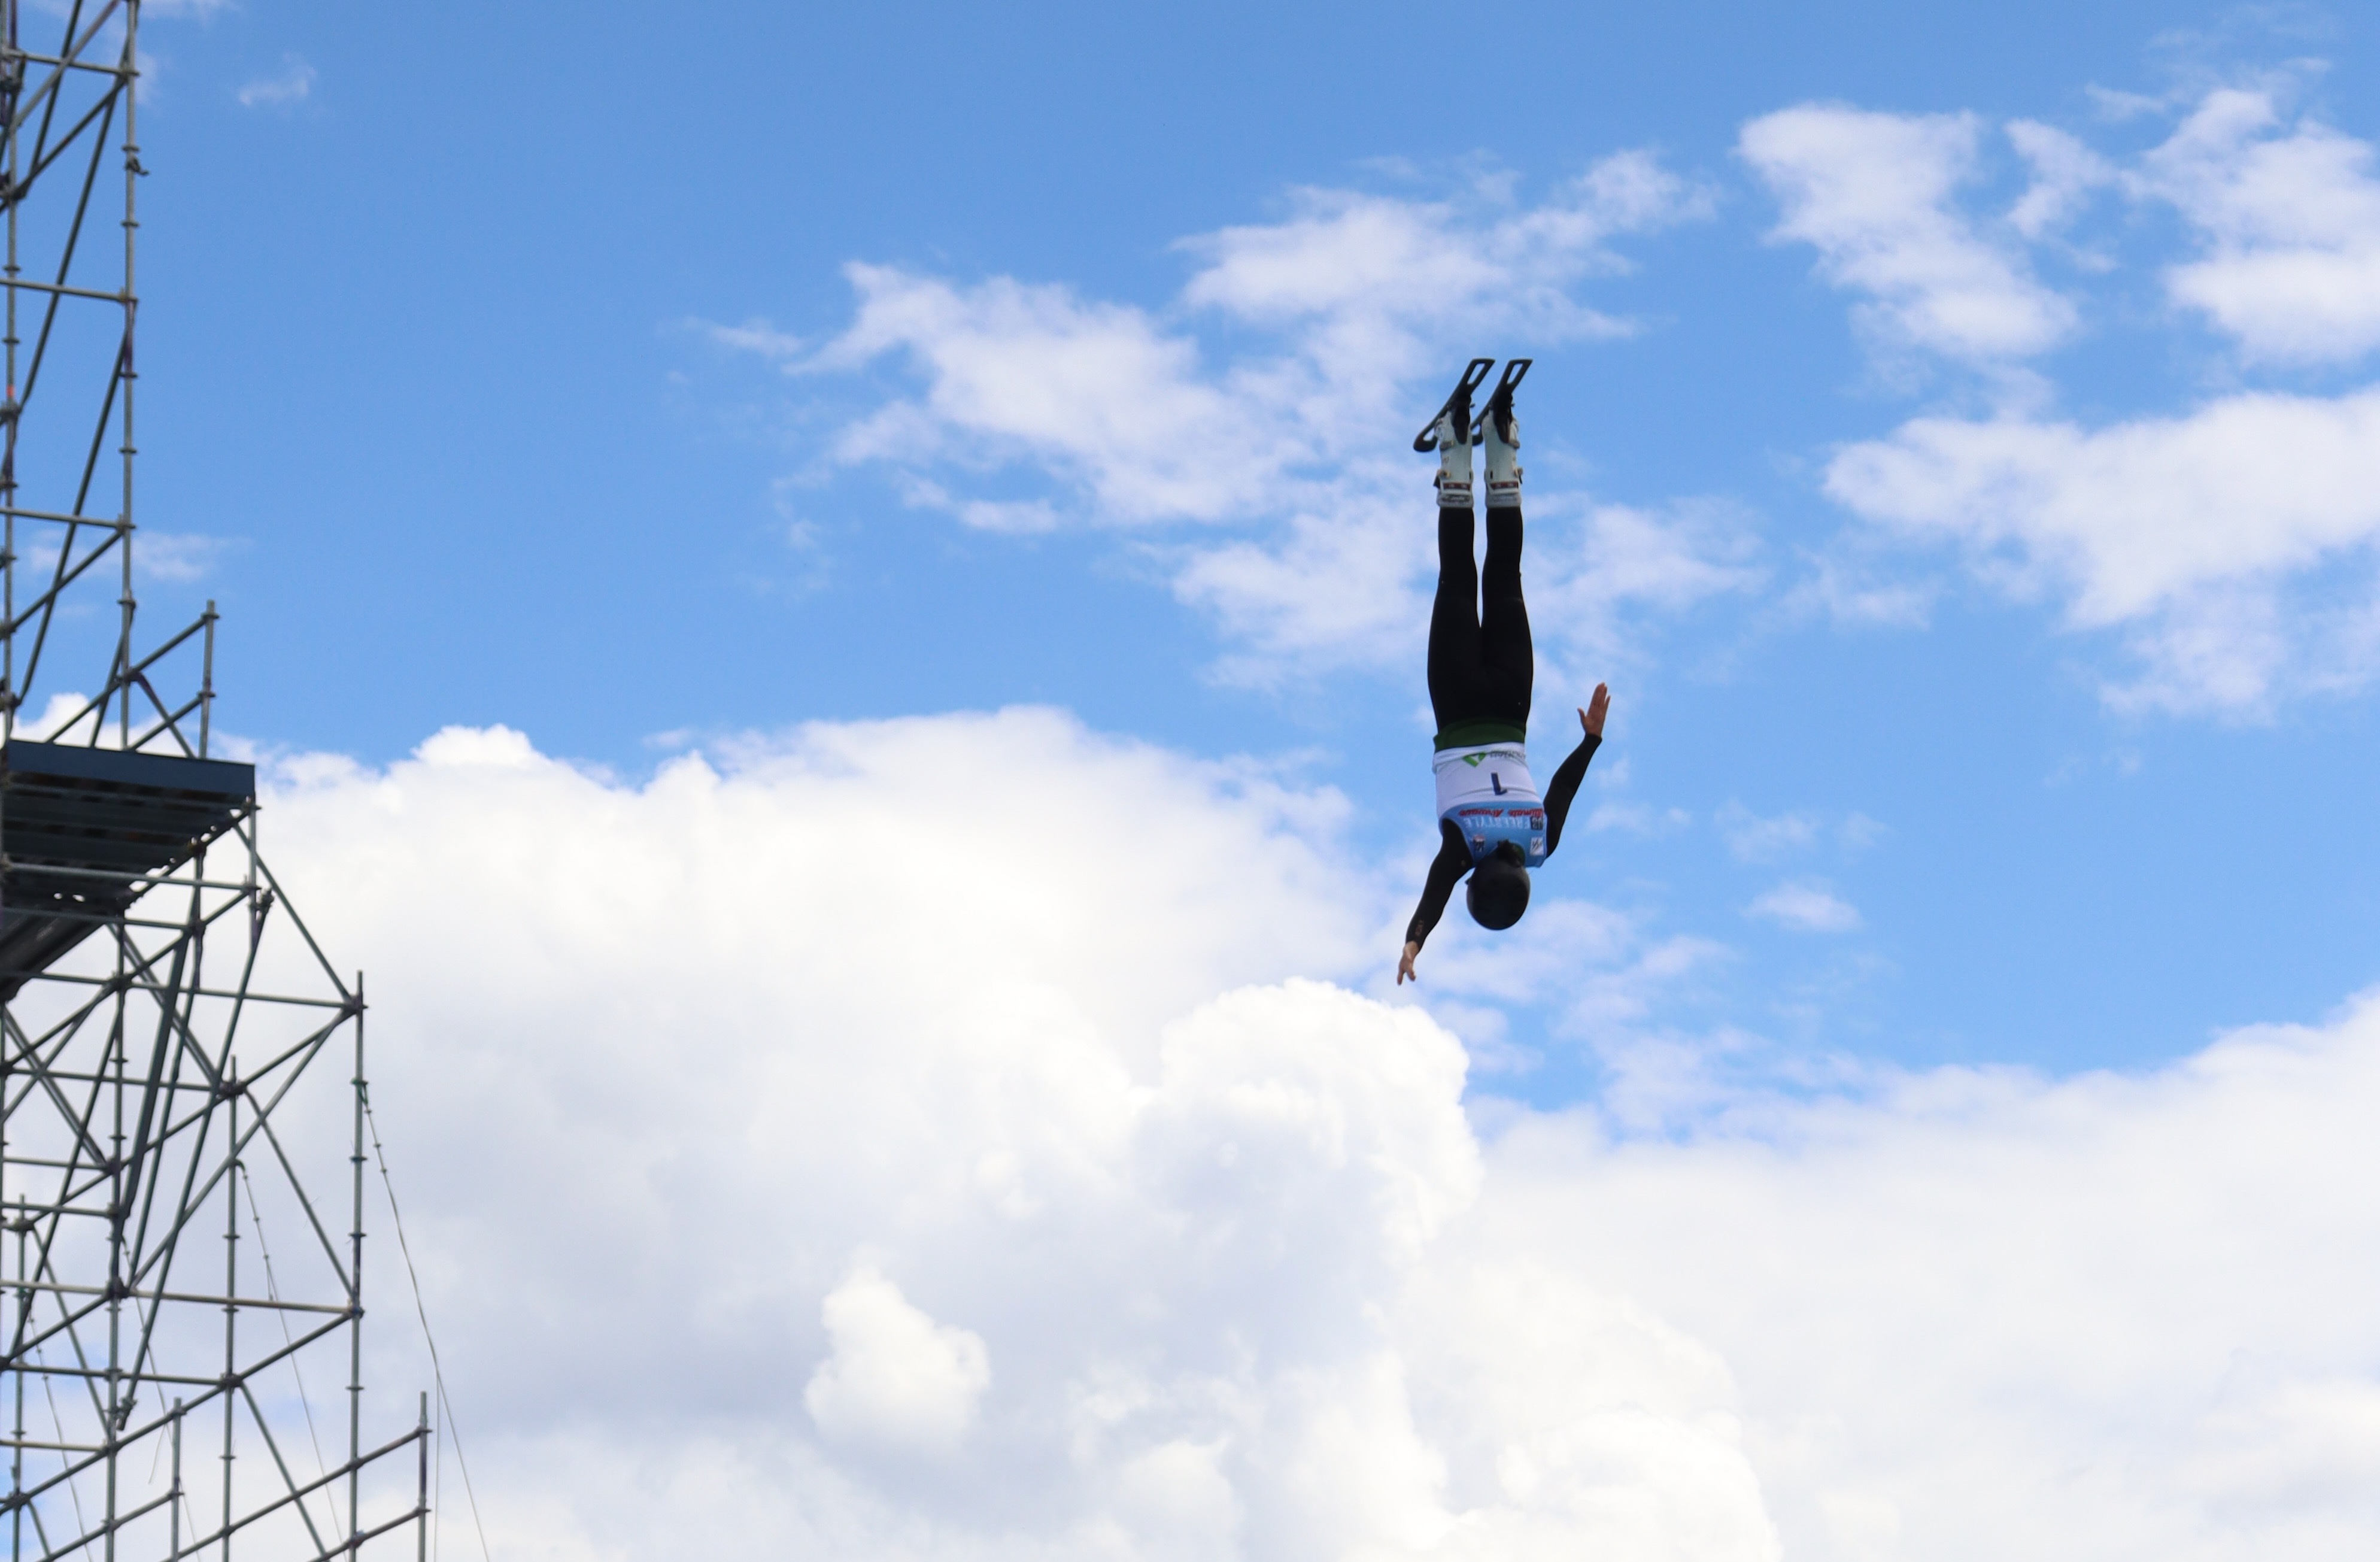 aerials athlete on water ramps